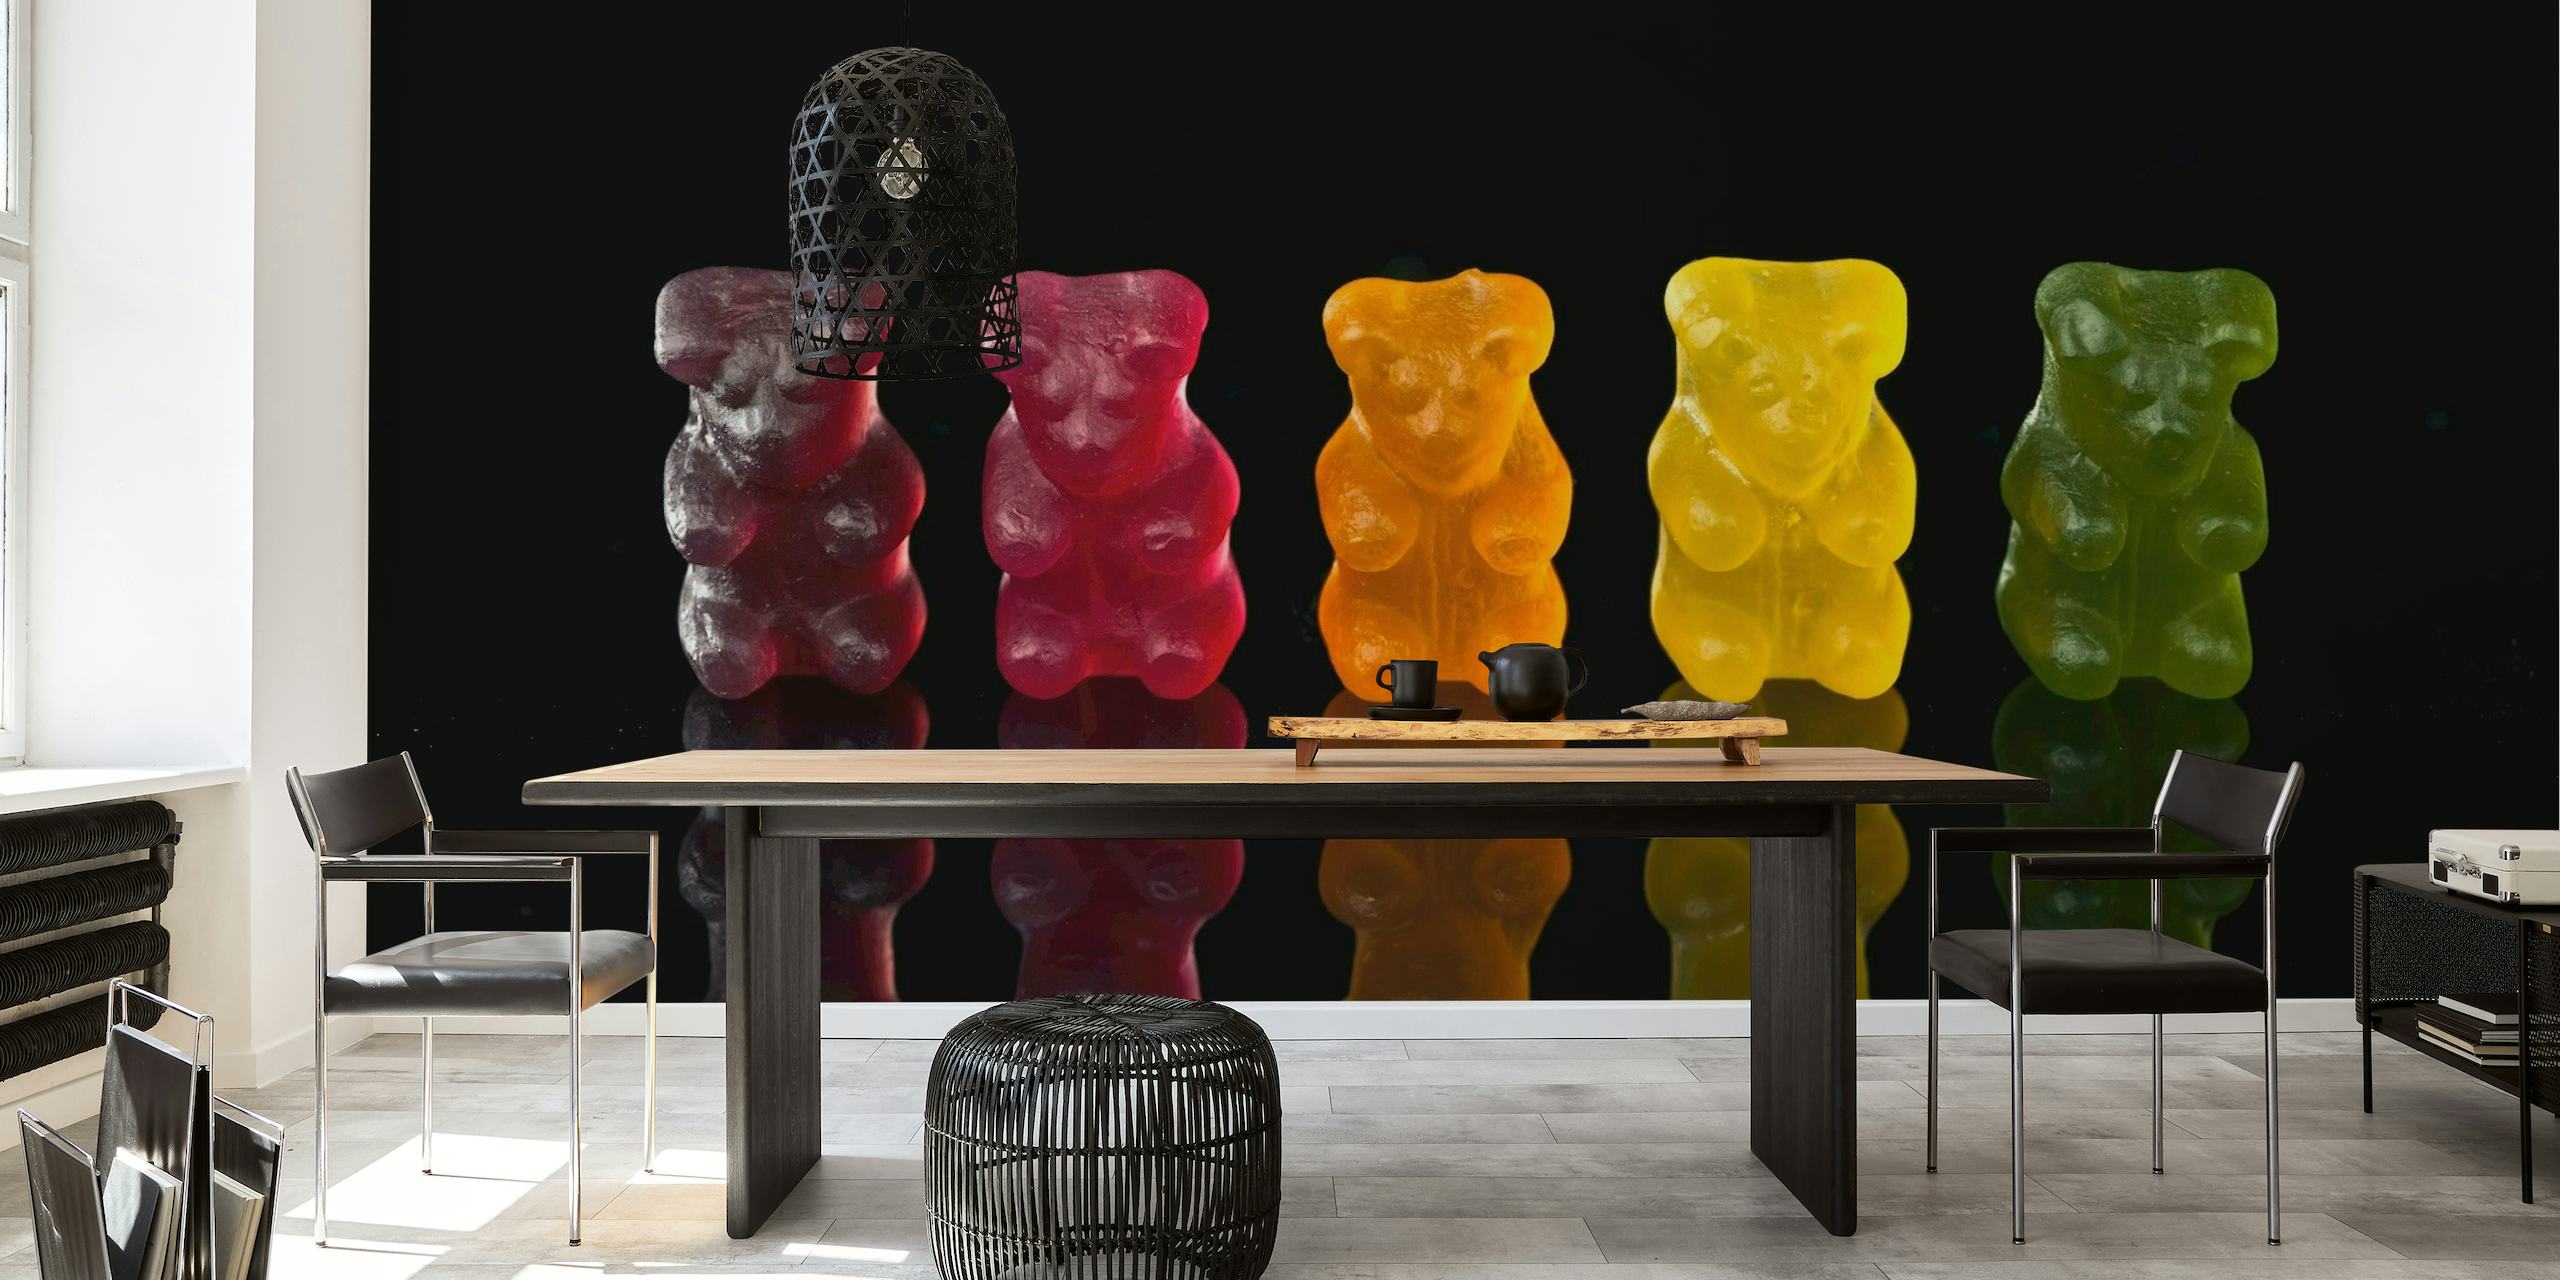 Colorful jelly bear mural on a black background